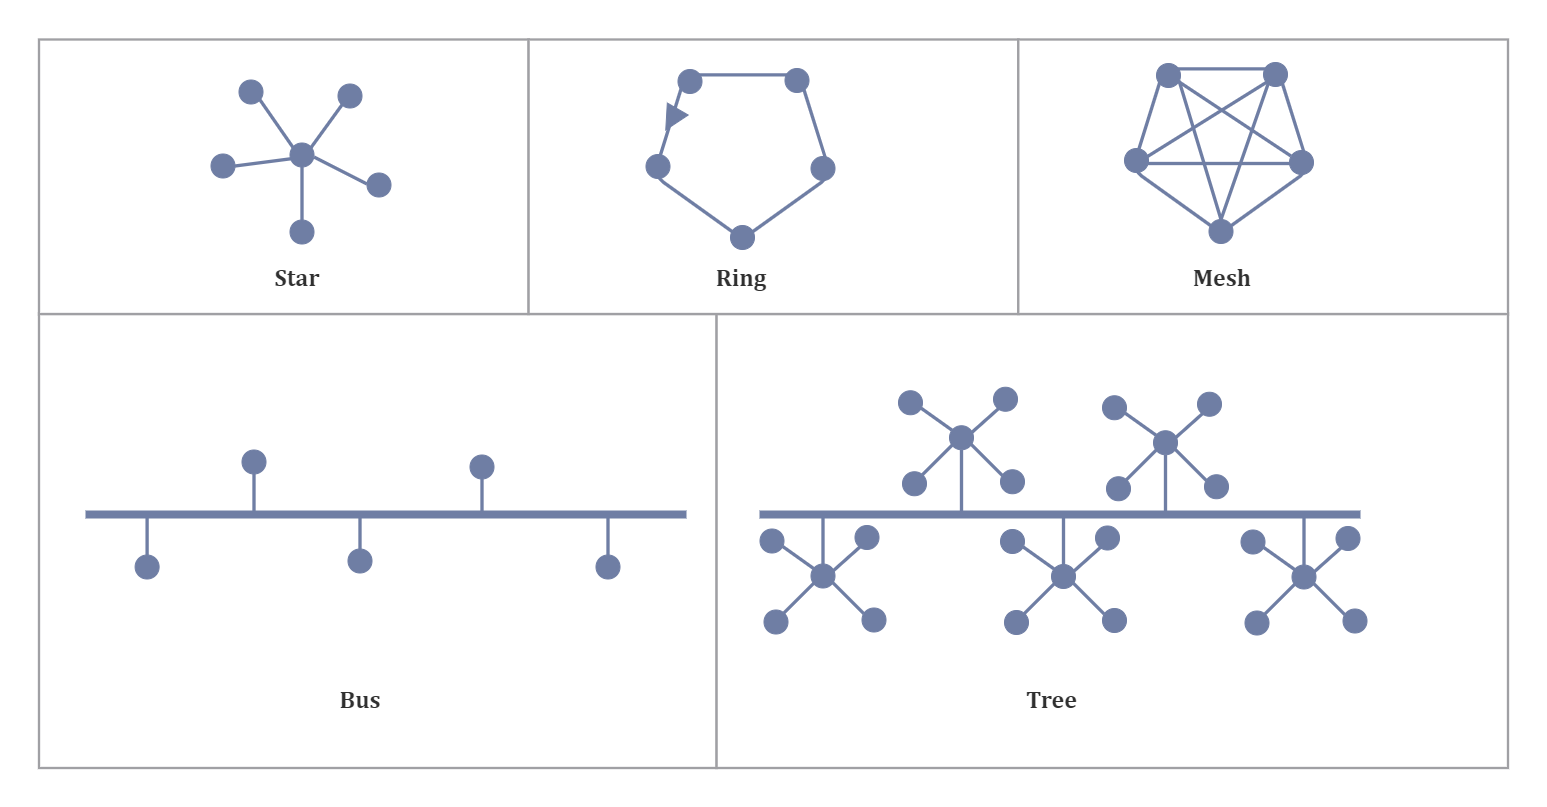 Network Topology Template